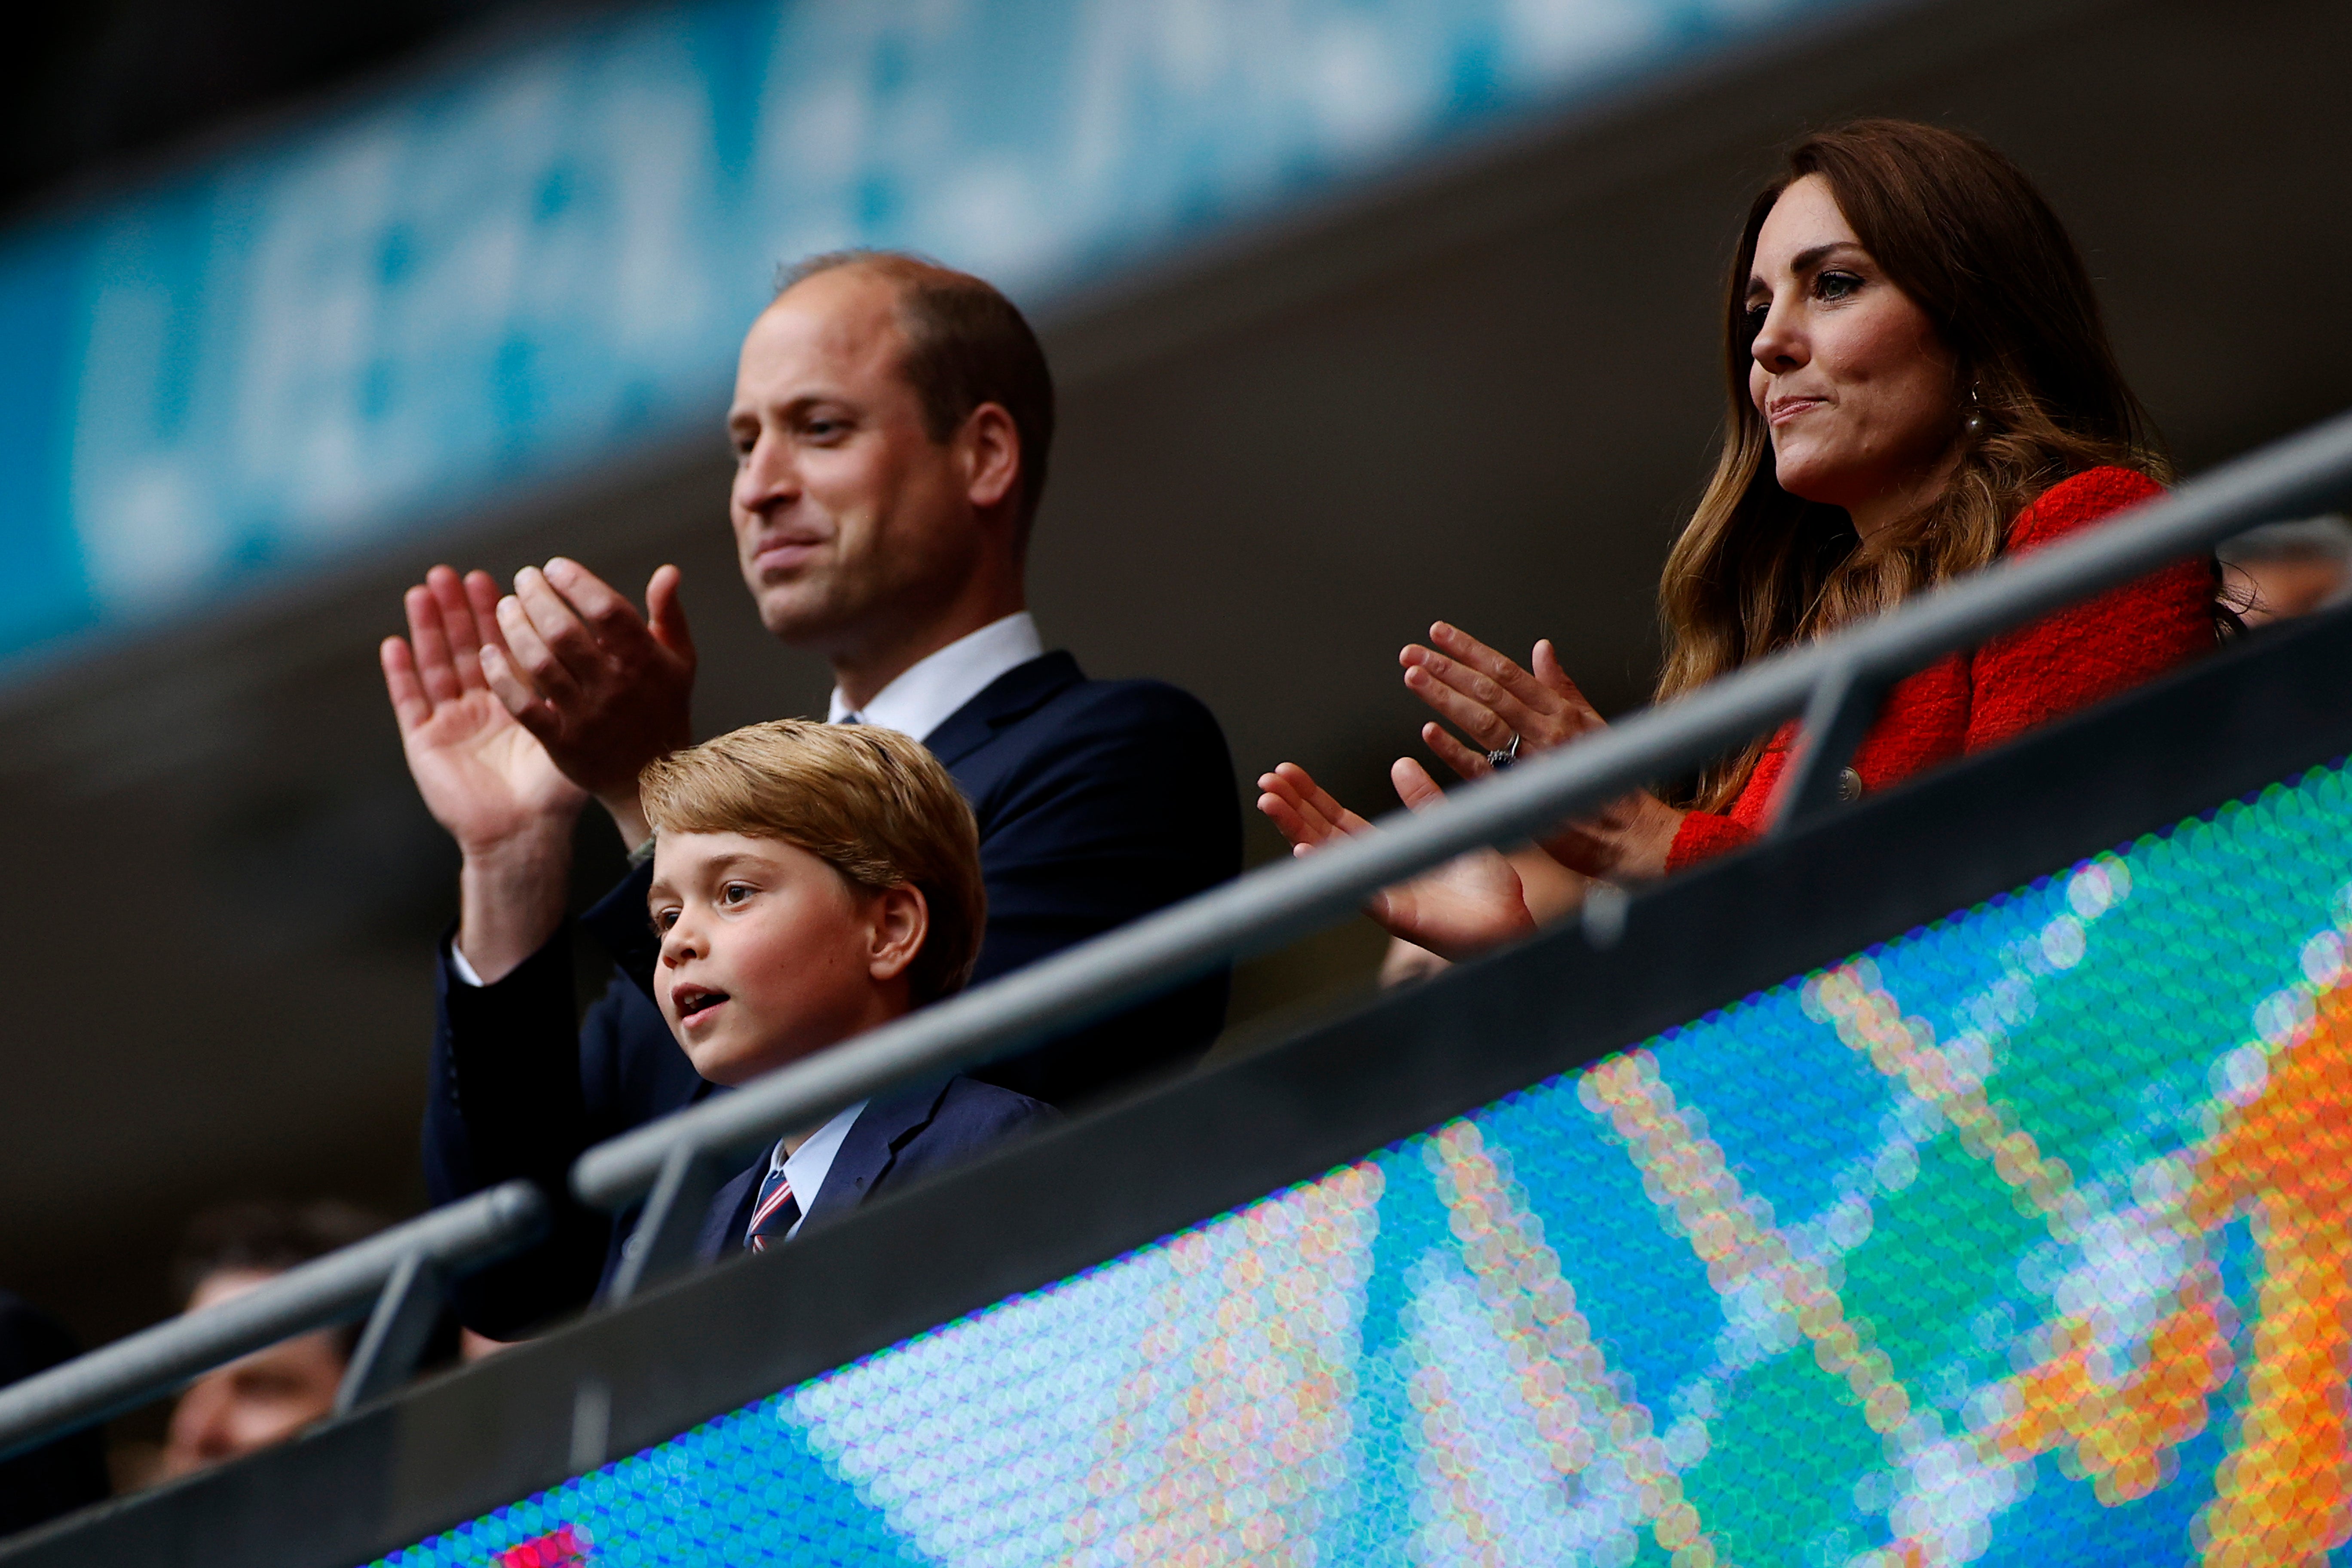 Prince George and his parents, the Duke and Duchess of Cambridge at Wembley for the Euro 2020 tournament